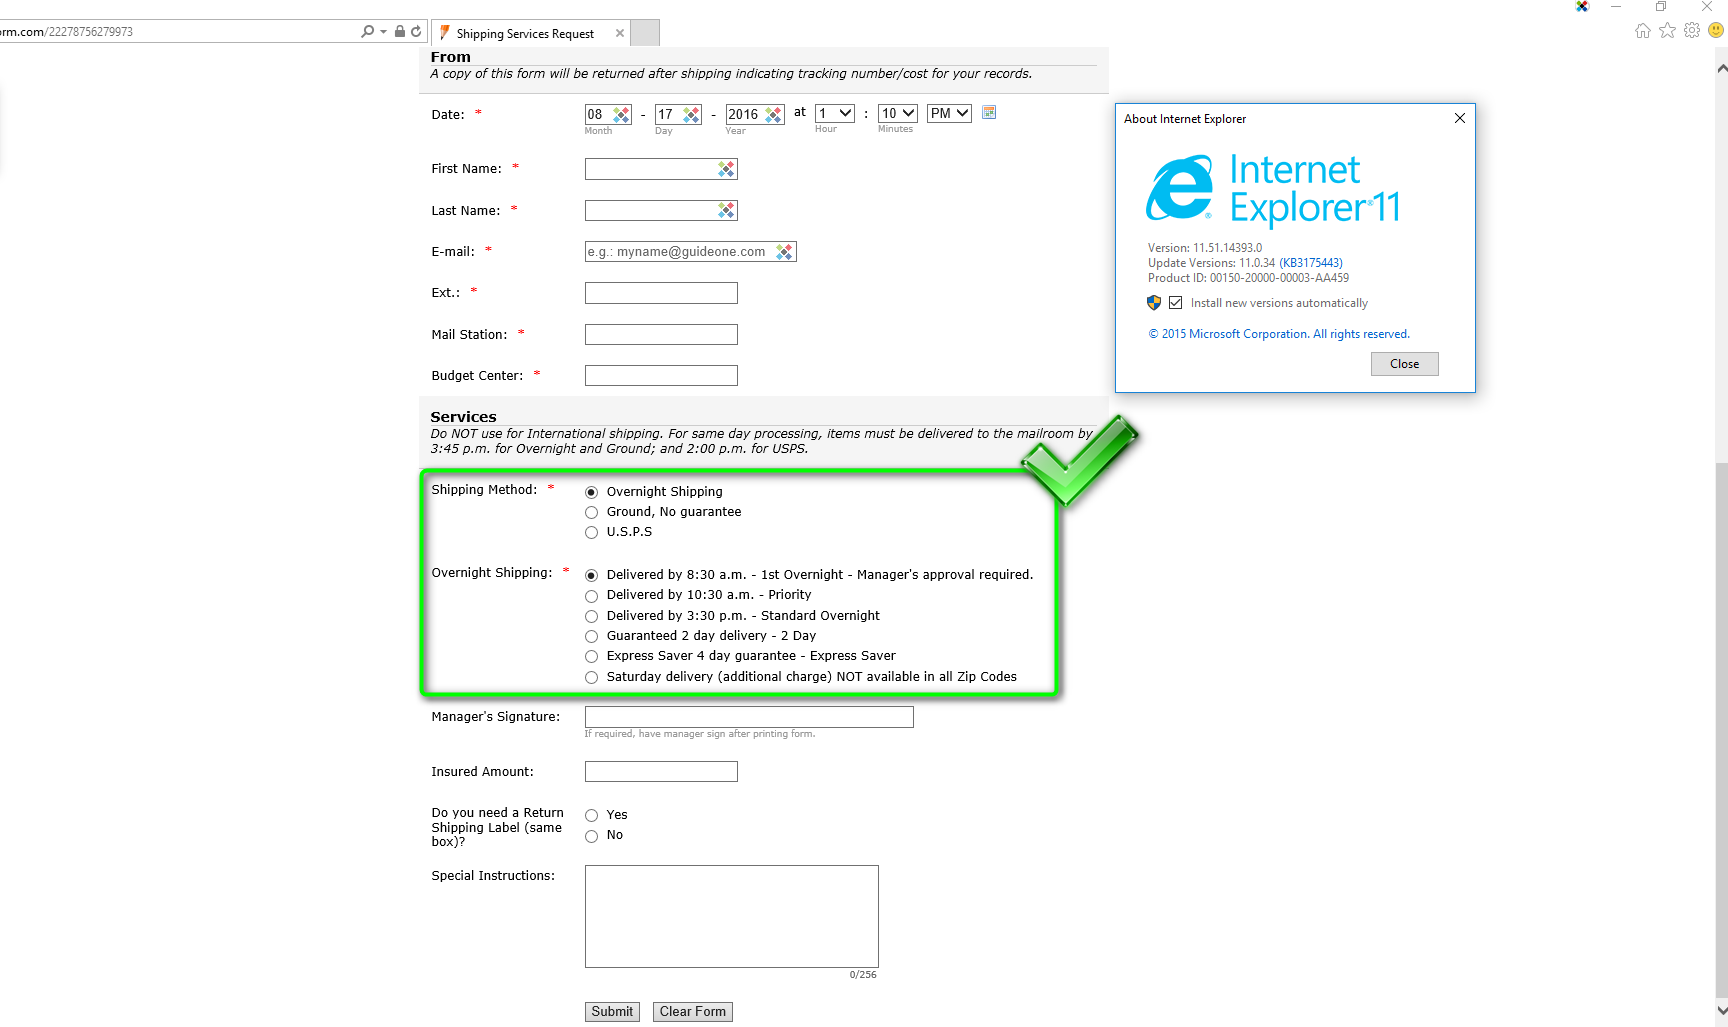 Conditional Logic on embedded form not working in IE Image 1 Screenshot 20